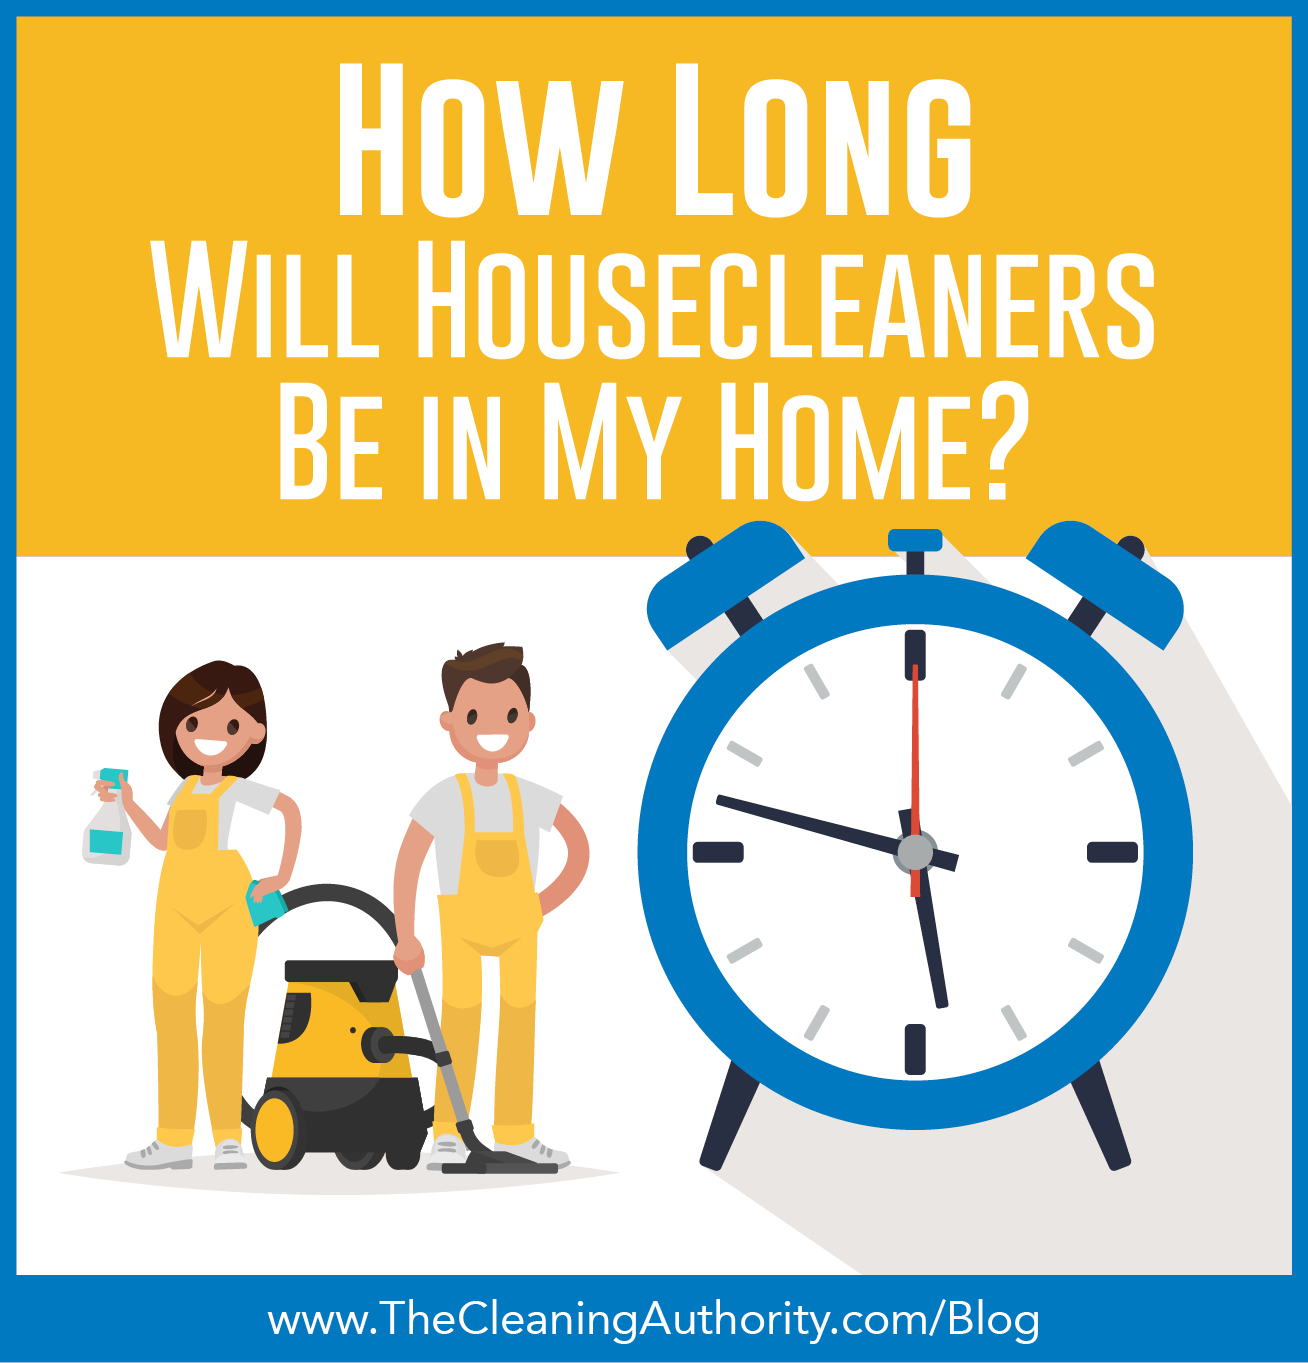 What Do House Cleaners Do?